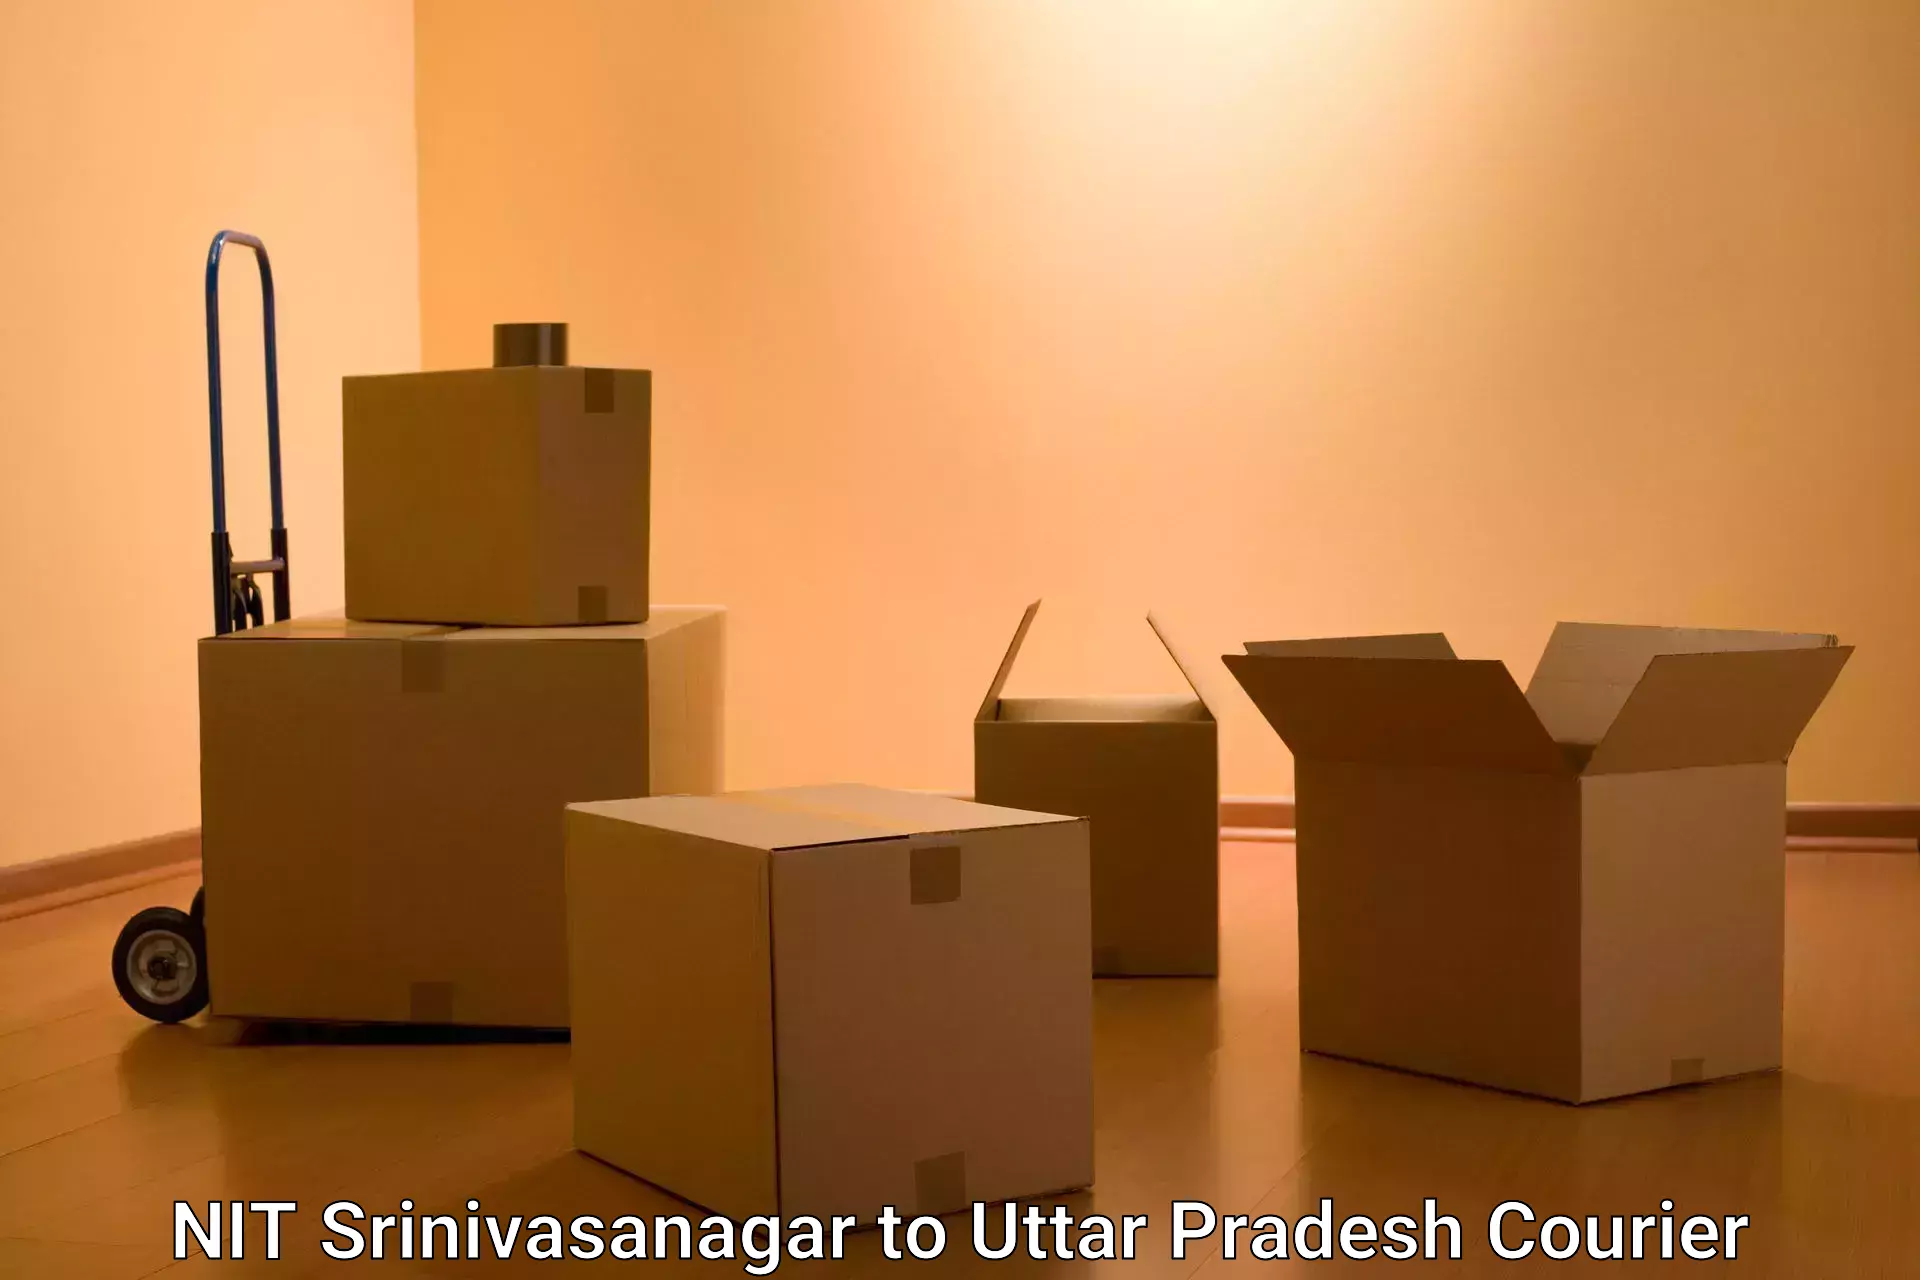 On-call courier service NIT Srinivasanagar to King Georges Medical University Lucknow